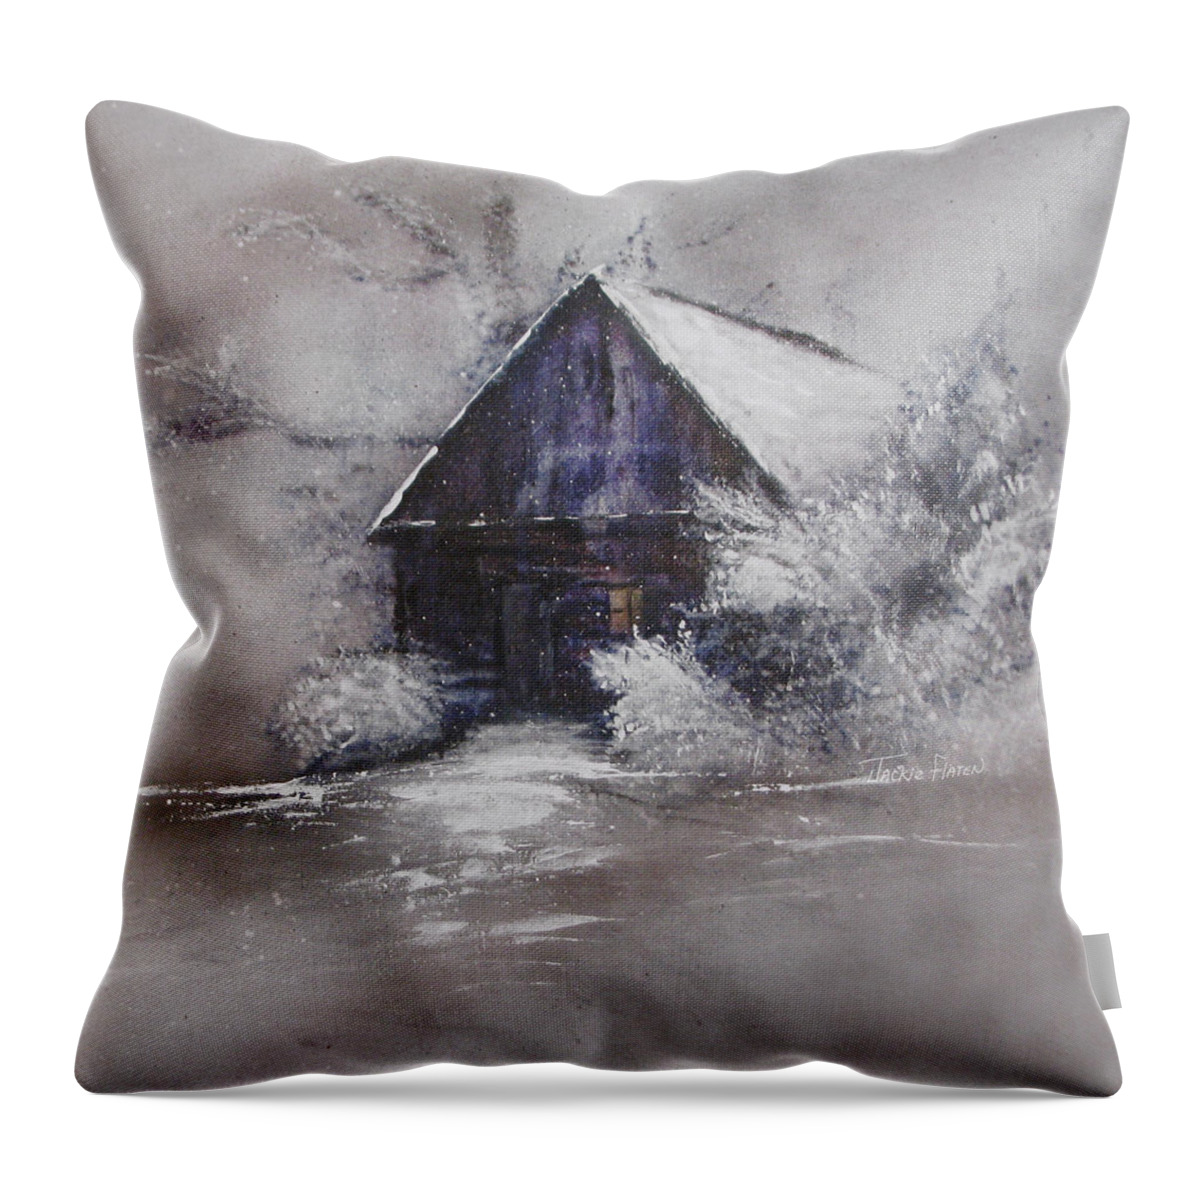 Canvas Prints Throw Pillow featuring the painting Winter Cottage by Jackie Flaten